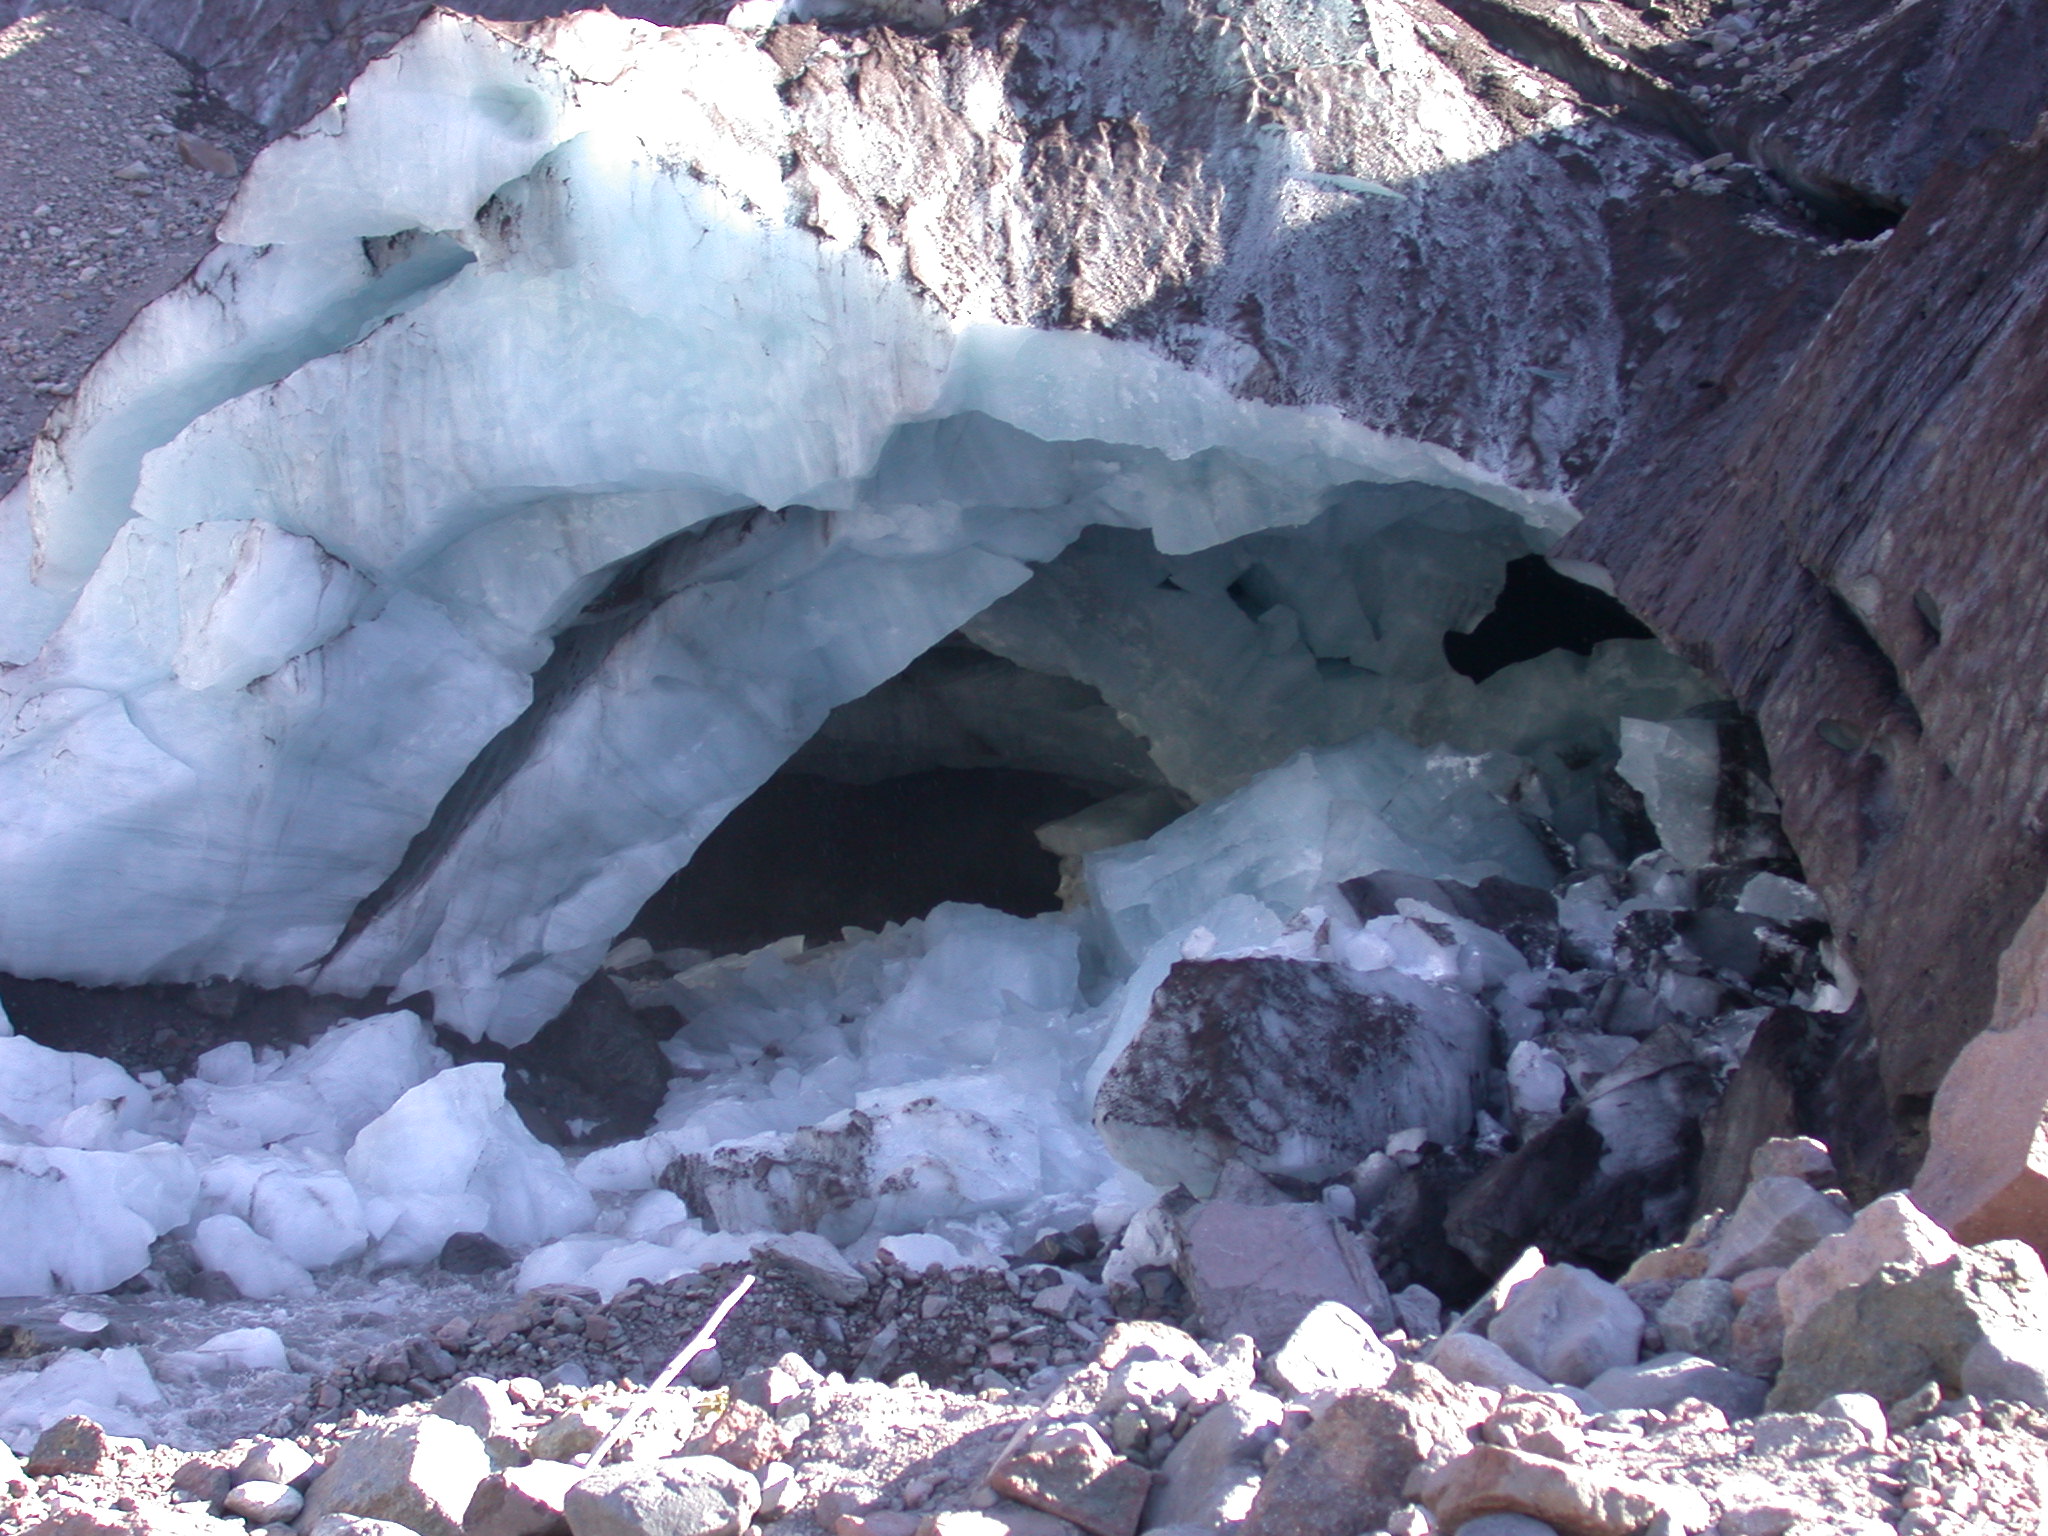 Further Collapse of Ice Cave at Base of Glacier on Mount Rainier